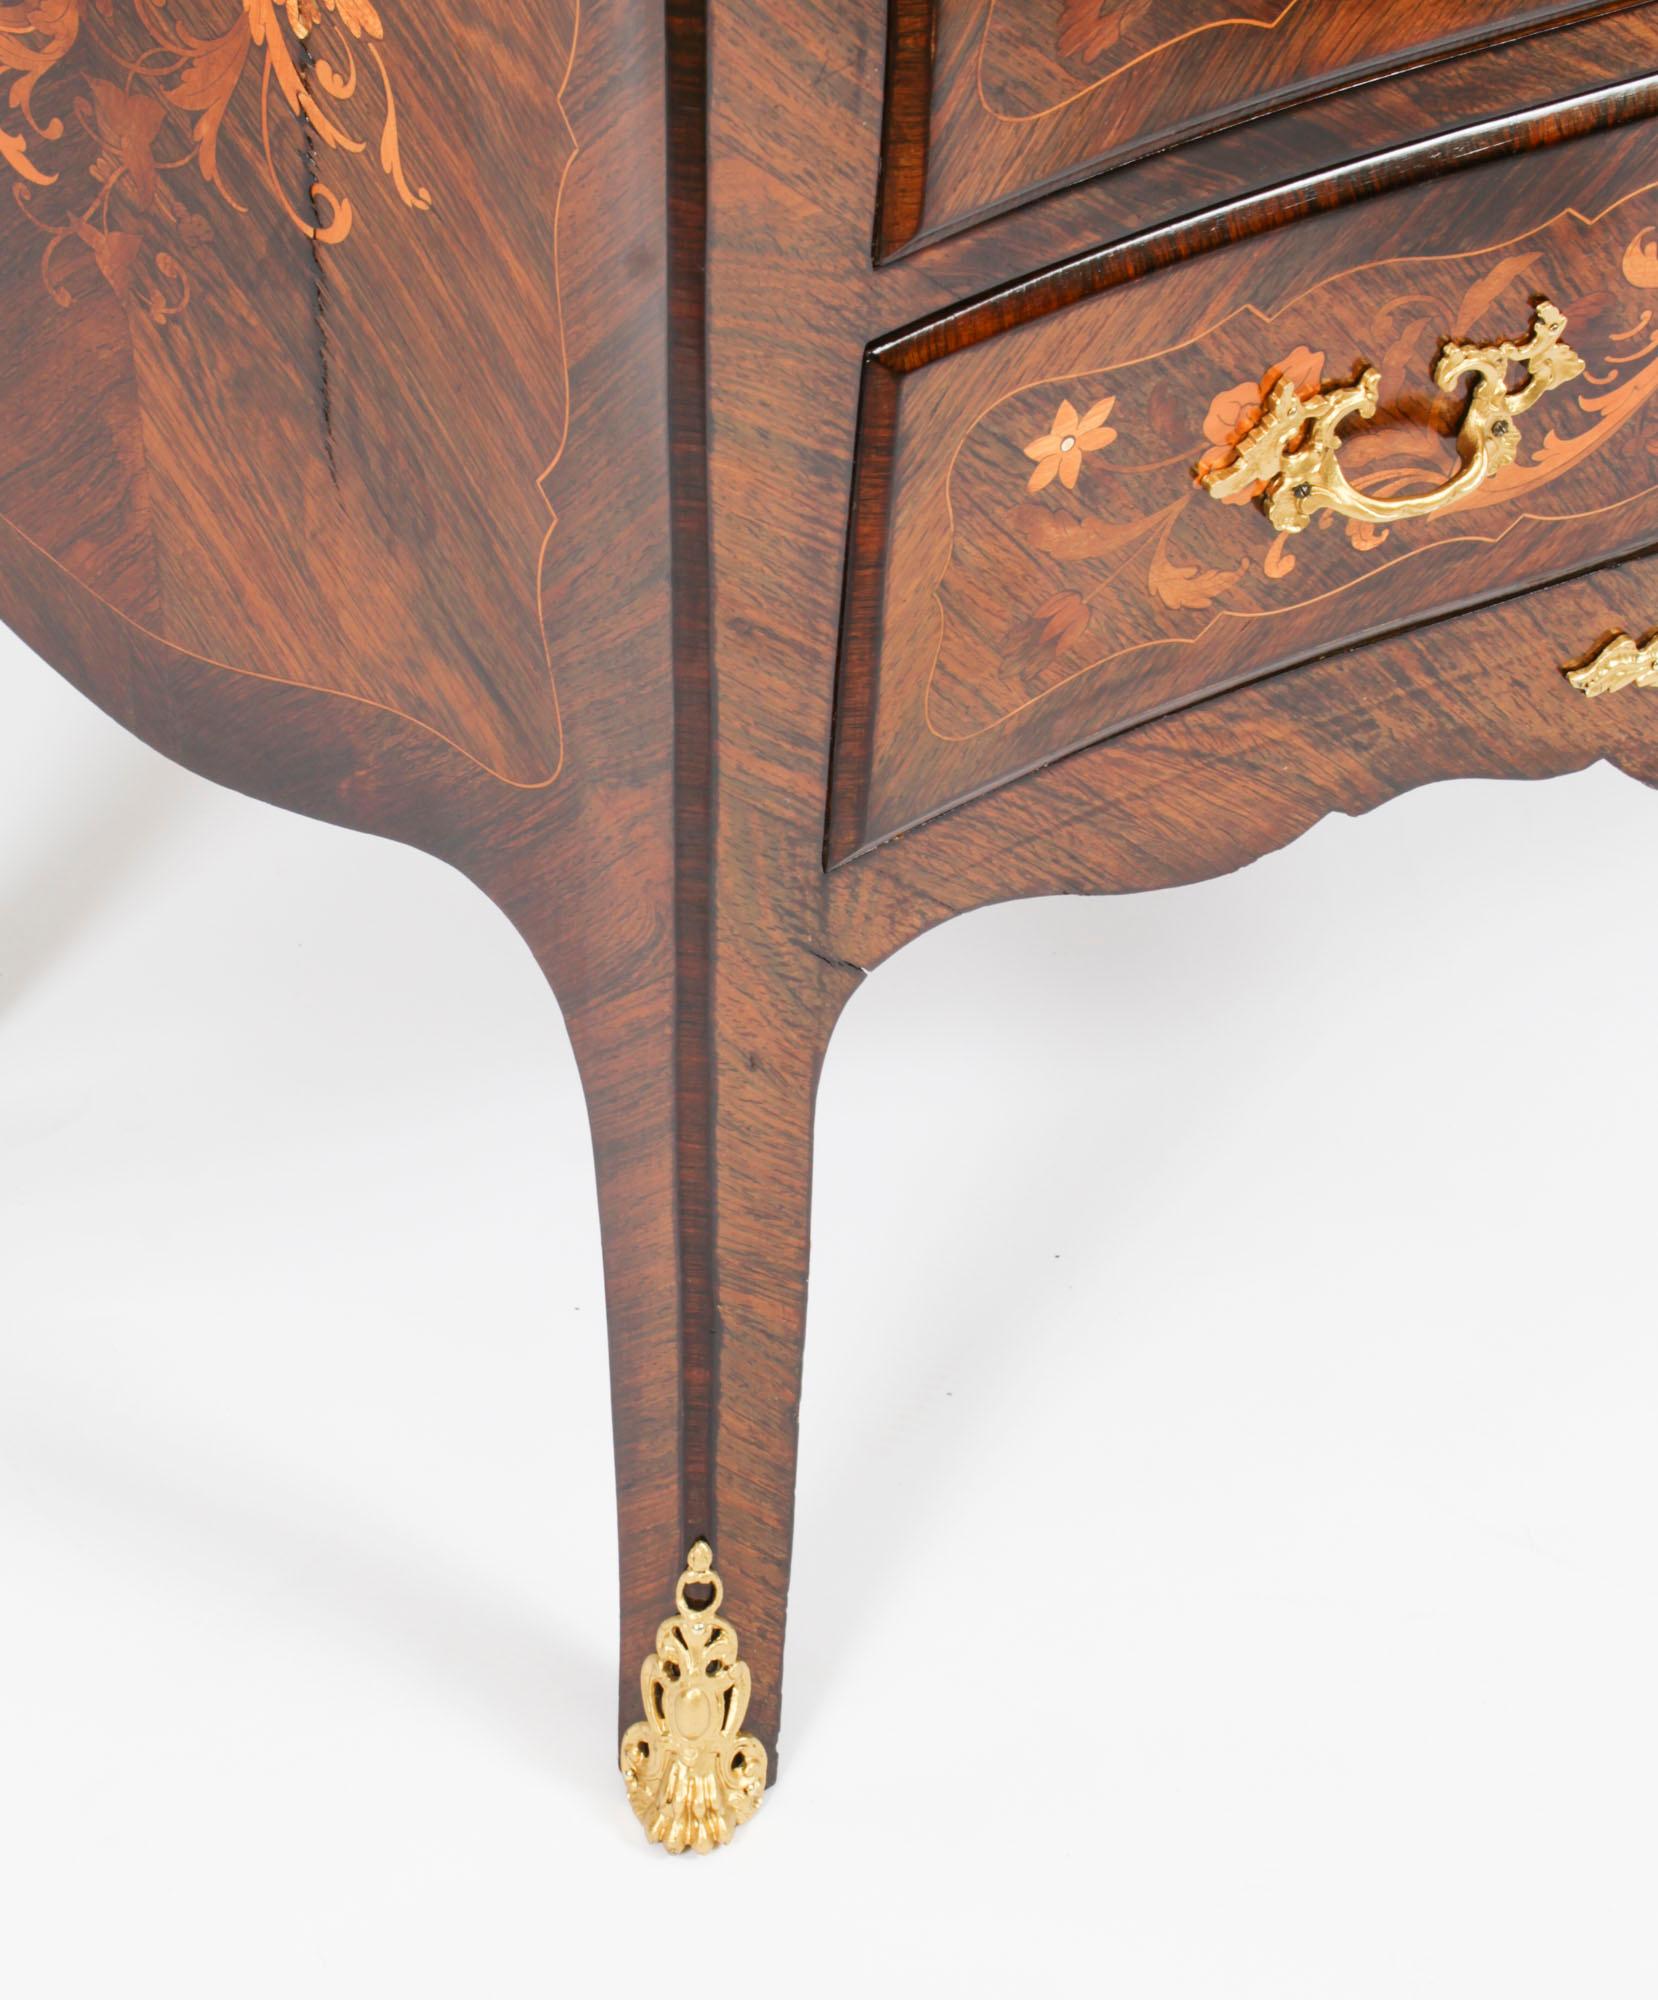 Antique French Louis Revival Marquetry Commode Chest of Drawers 19th Century For Sale 10